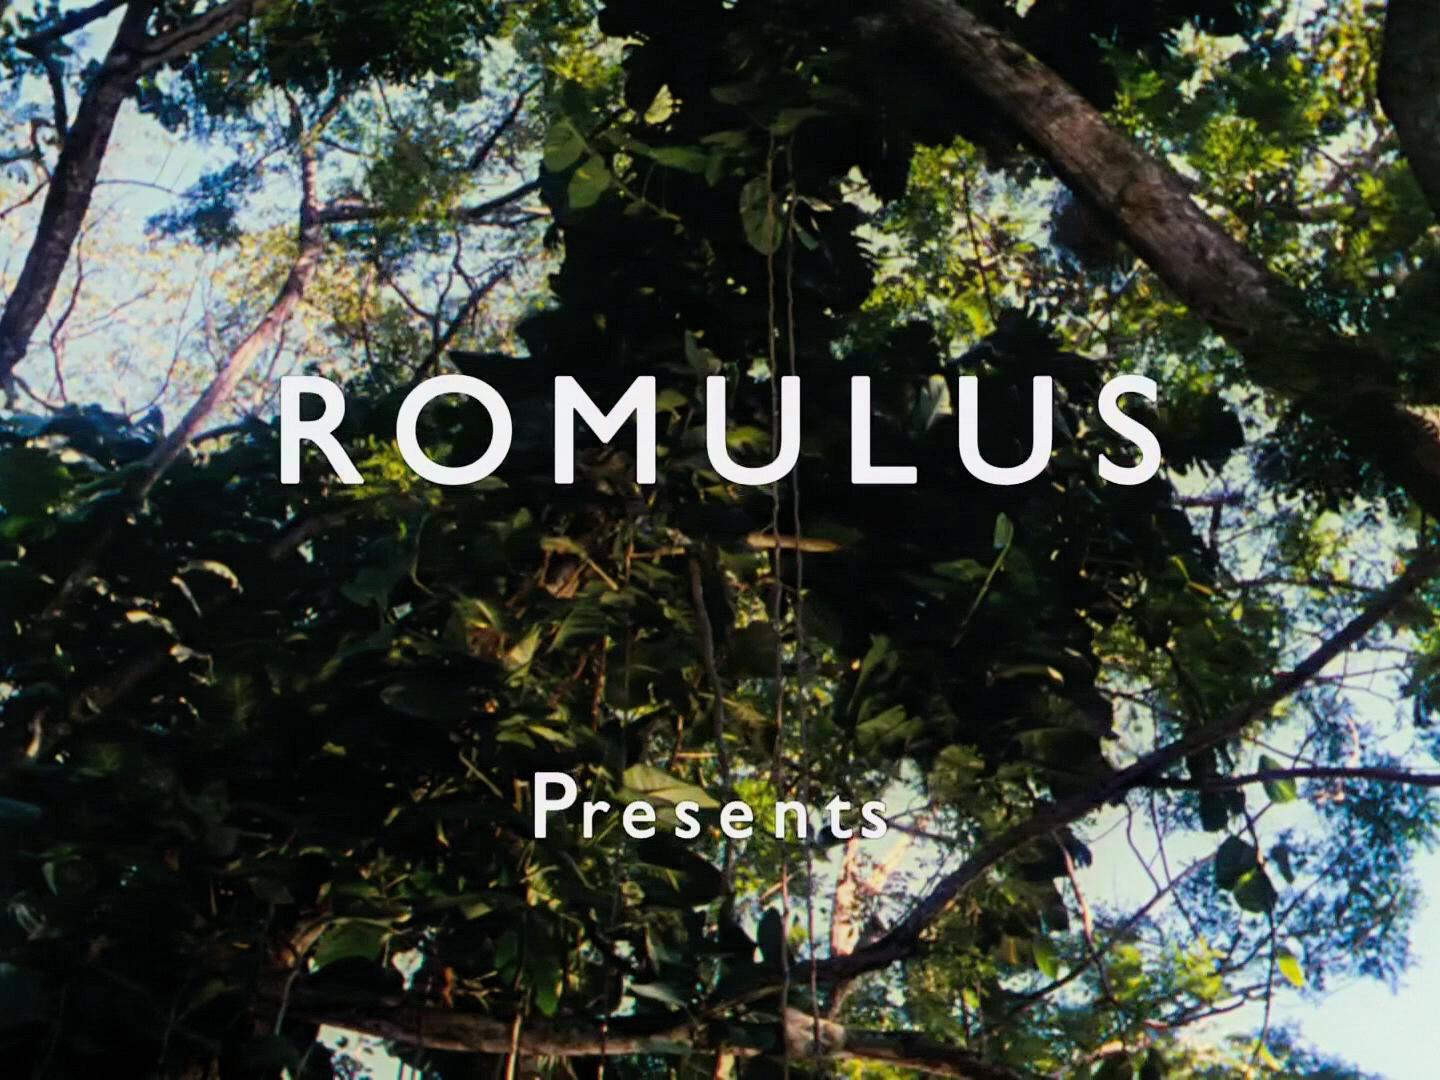 Main title from The African Queen (1951) (1). Romulus presents